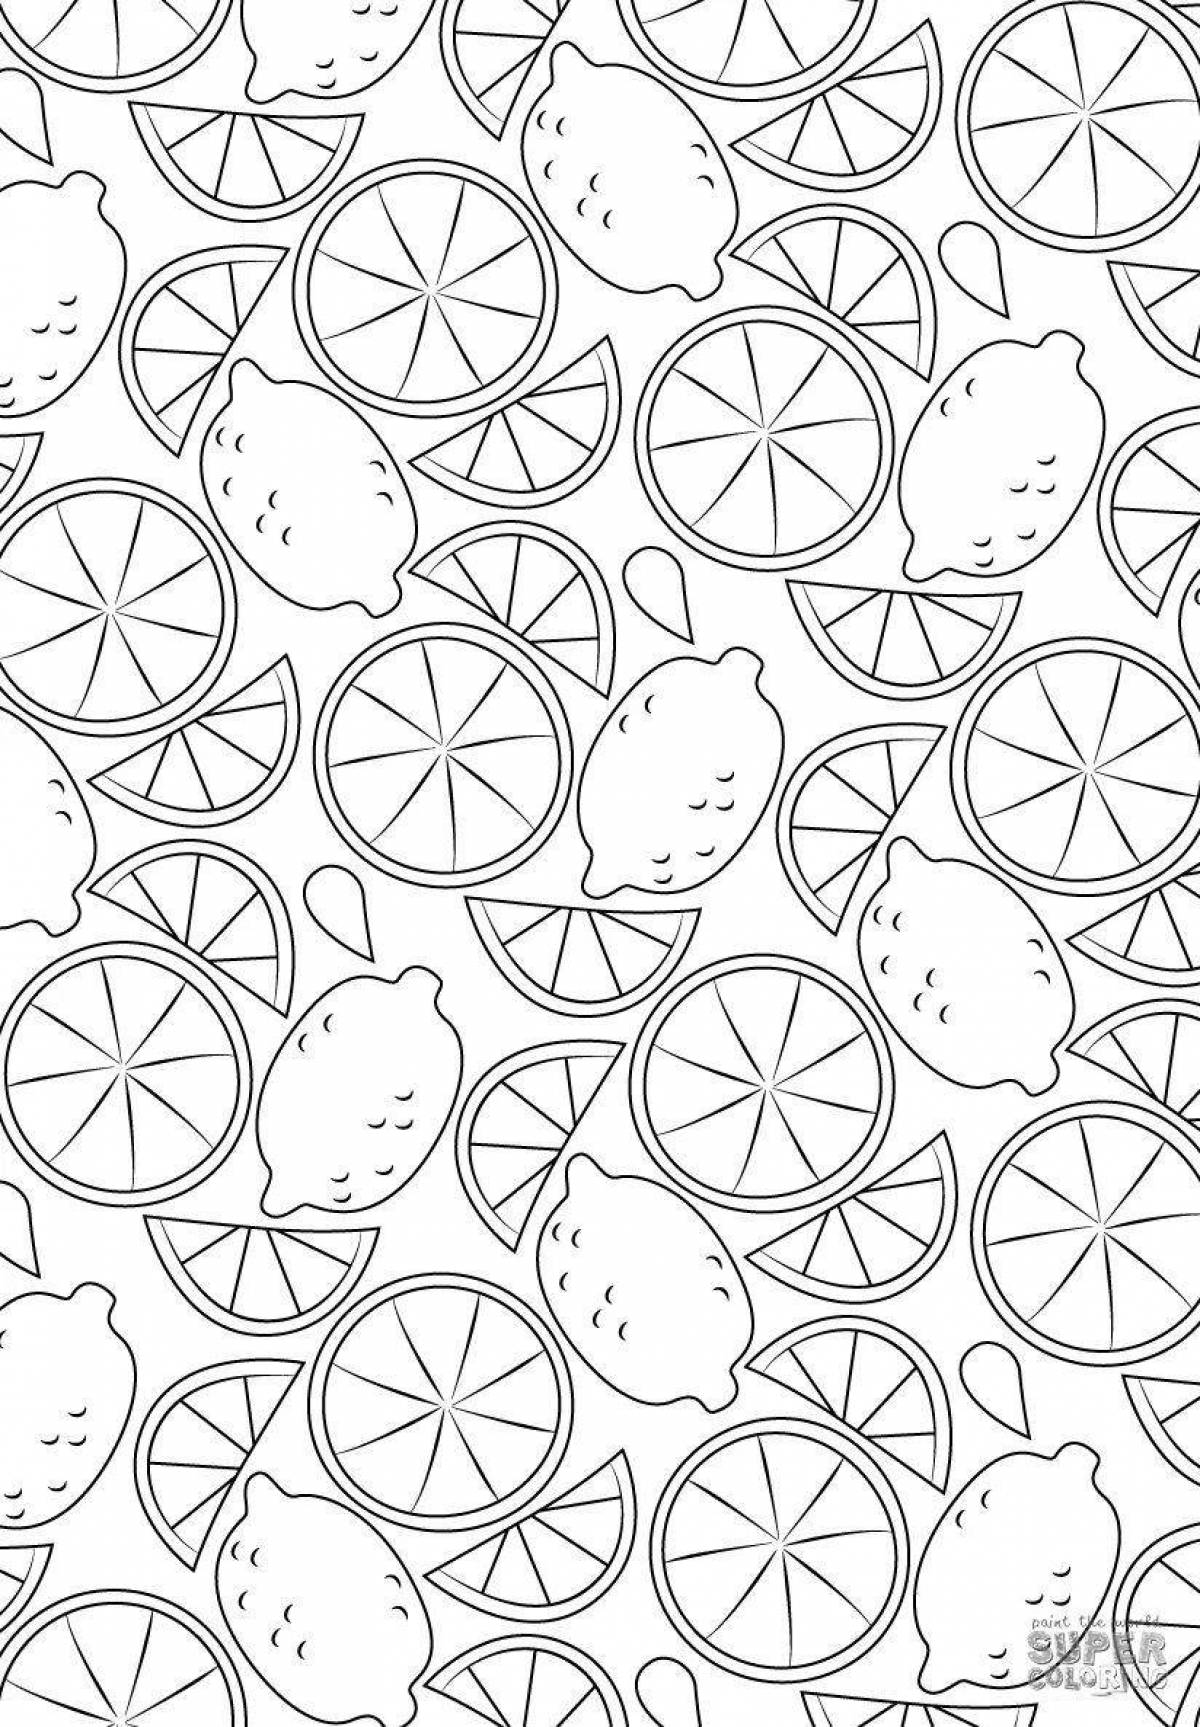 Funny phone wallpaper coloring page